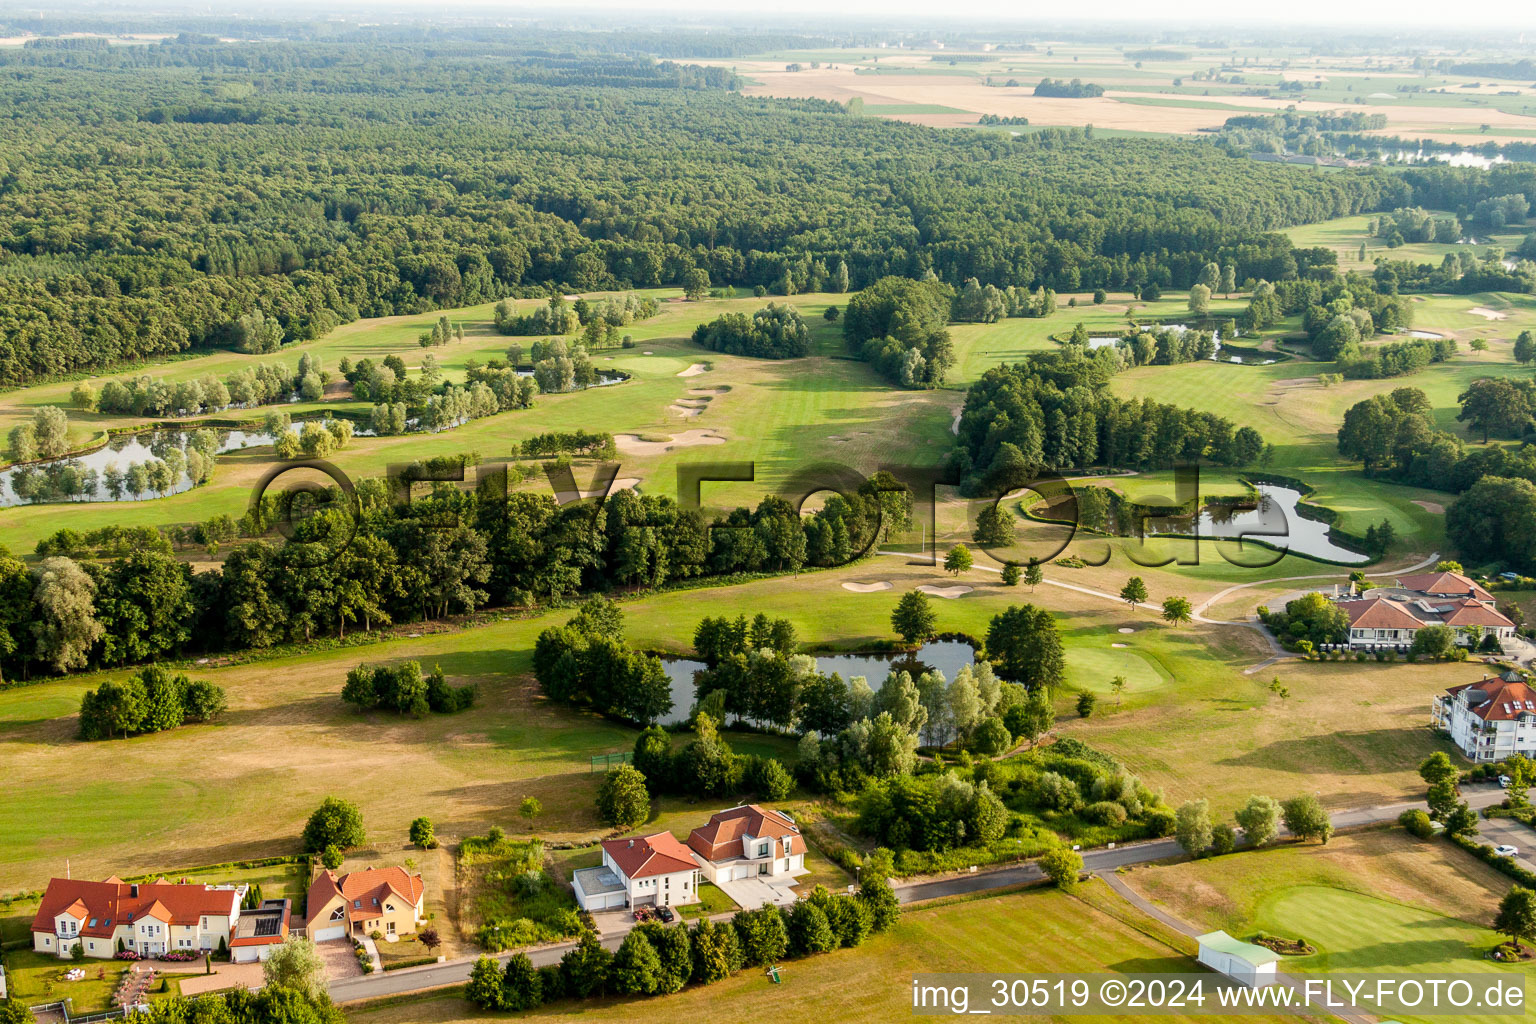 Aerial photograpy of Grounds of the Golf course at Golfclub Soufflenheim Baden-Baden in Soufflenheim in Grand Est, France